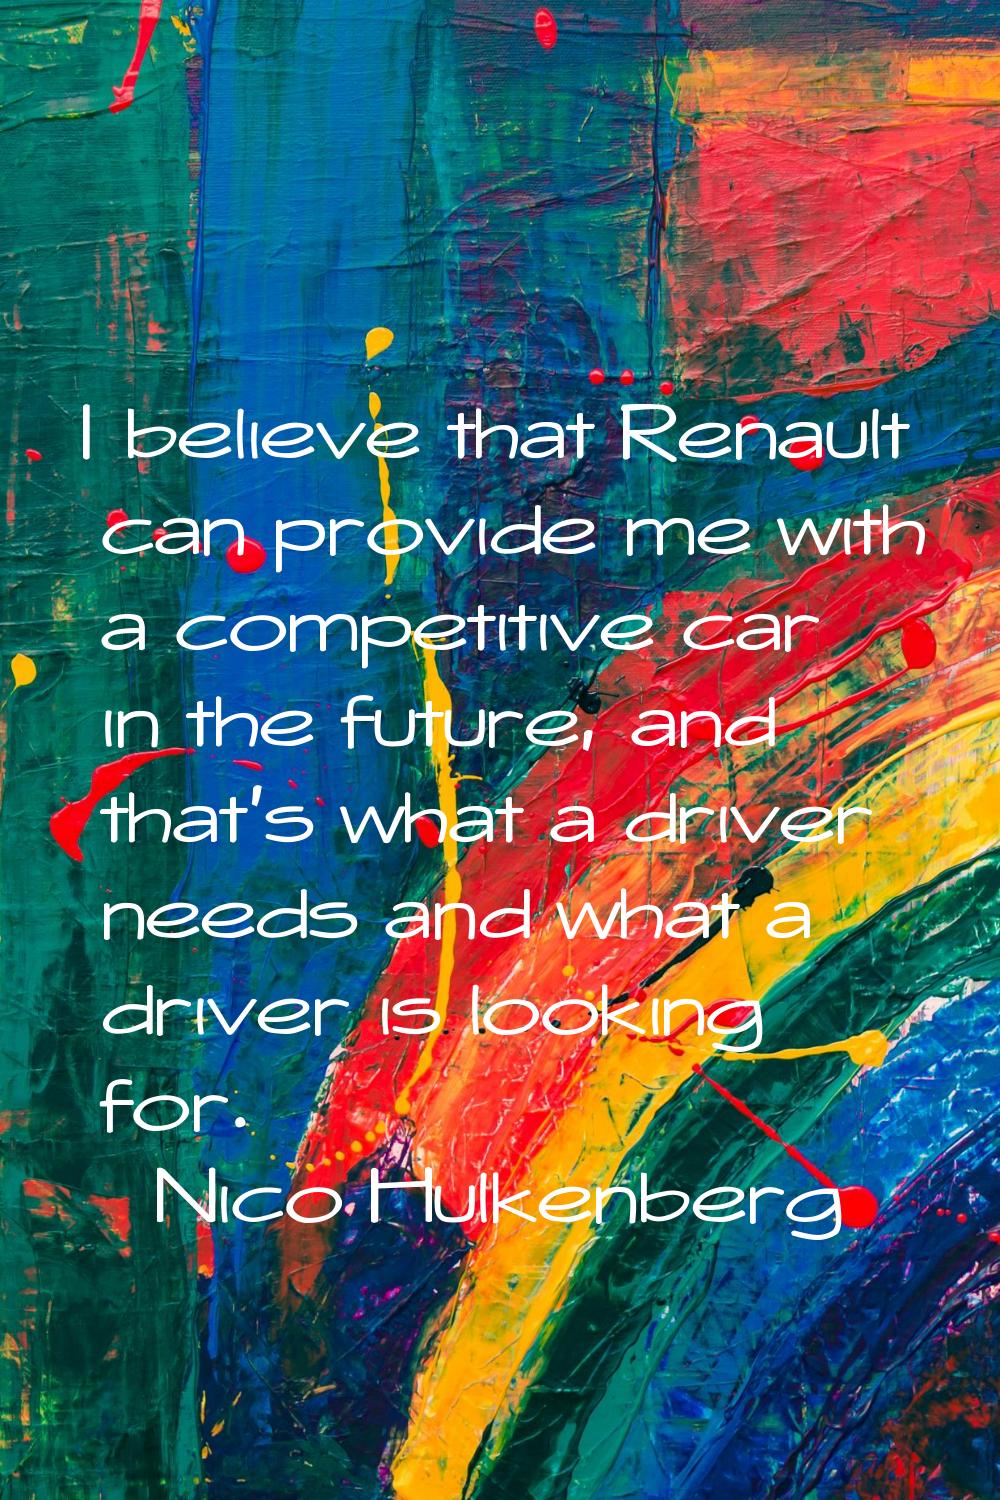 I believe that Renault can provide me with a competitive car in the future, and that's what a drive